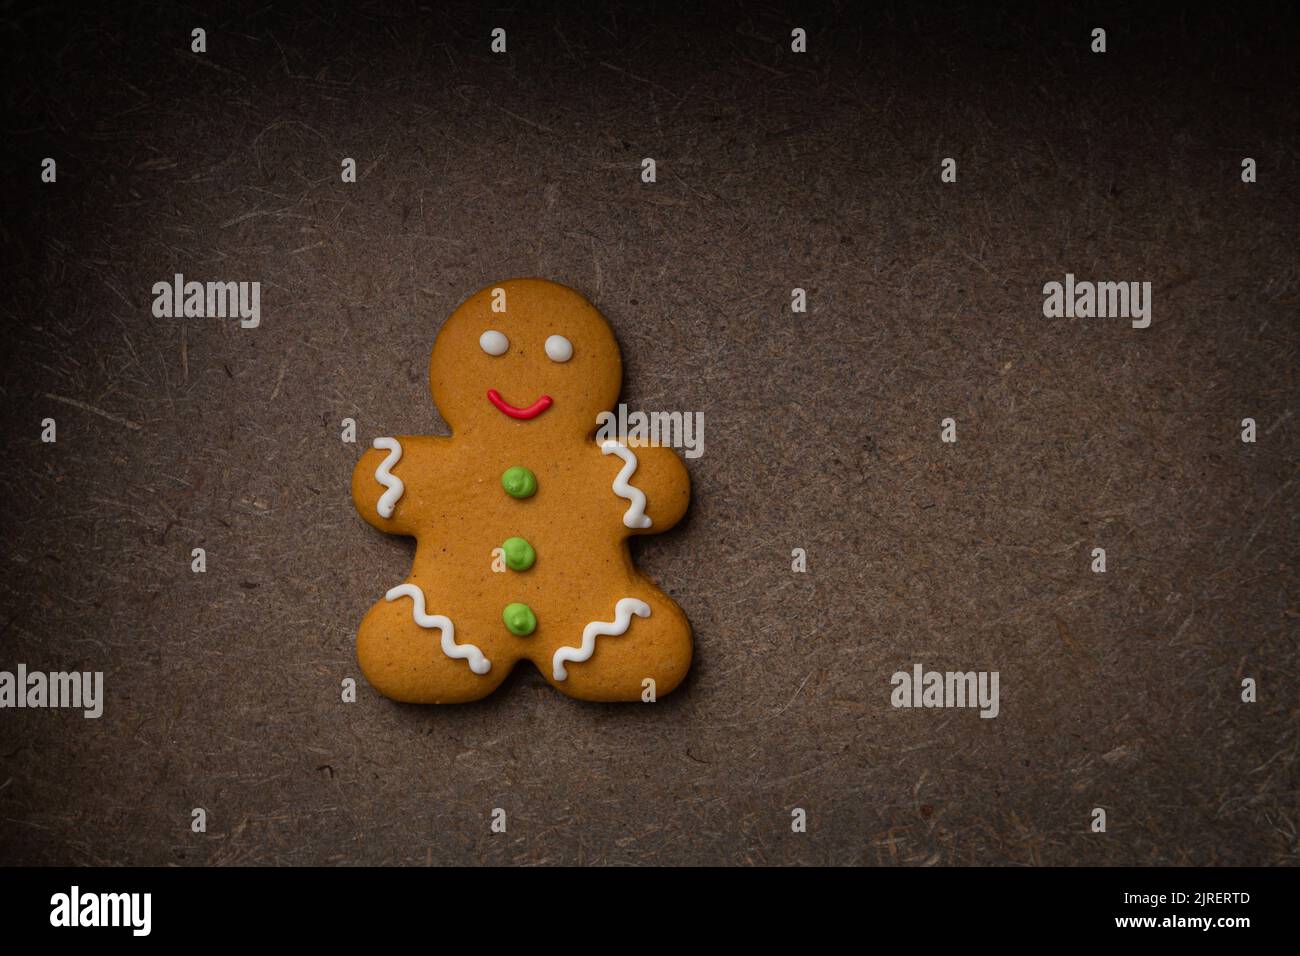 Top view of Christmas gingerbread man  cookies on dark surface Stock Photo